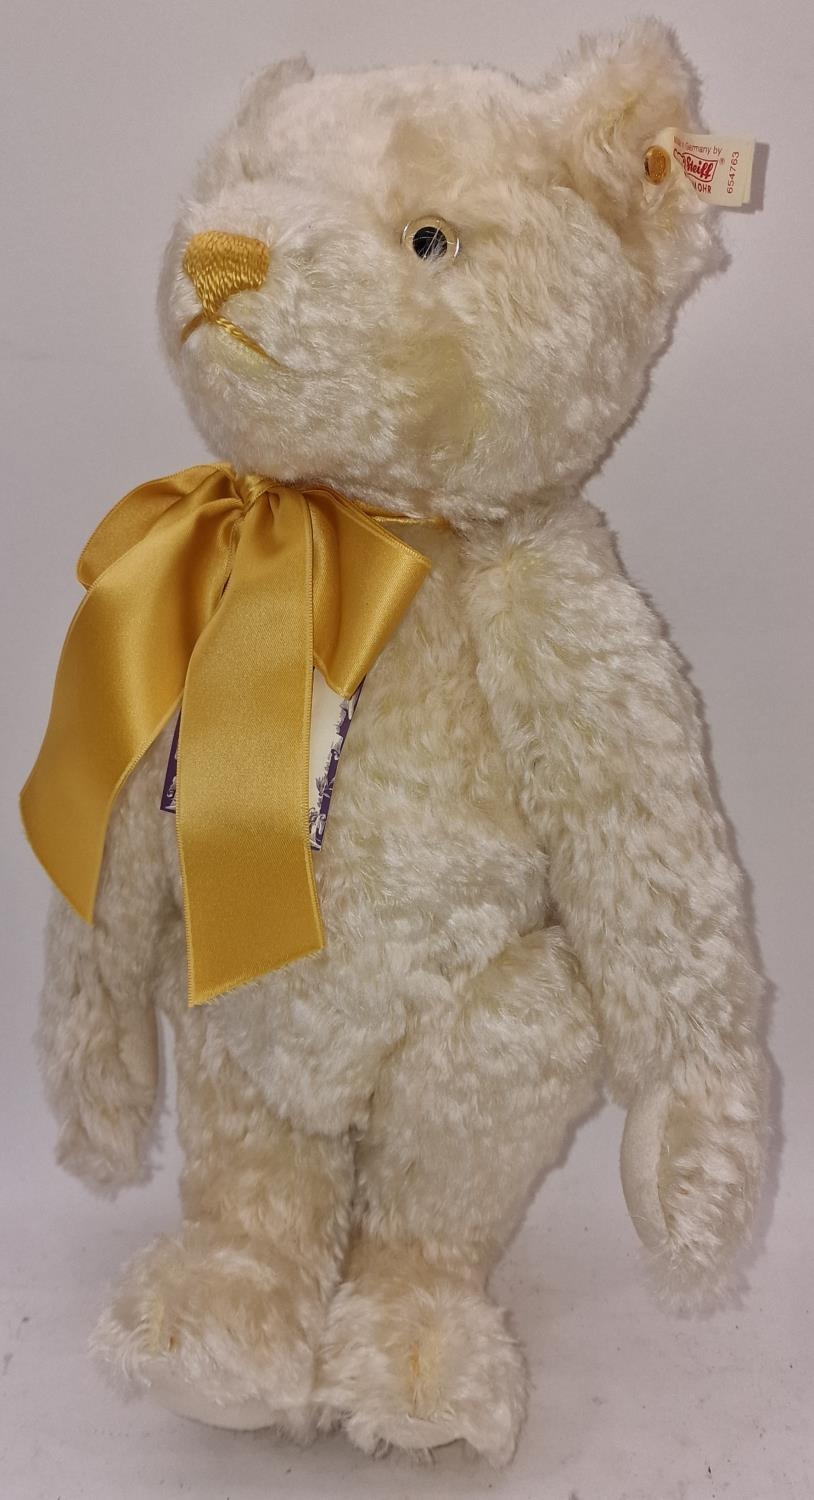 Steiff Limited edition 639/4000 British Collector's Teddy Bear 2000 champagne 40cm. Boxed with - Bild 2 aus 4